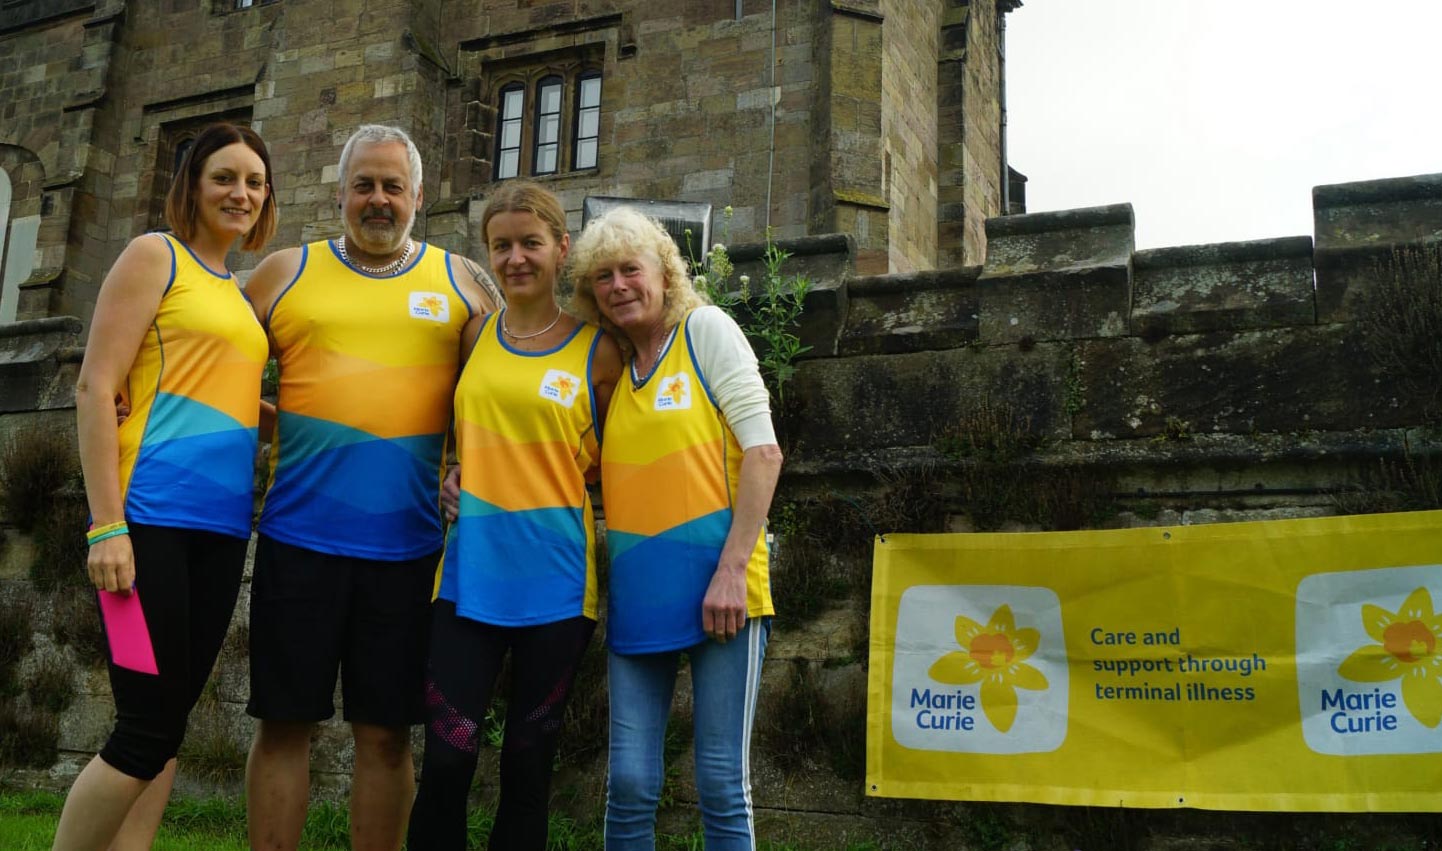 Tri-hards take on Yorshire Warrior for Marie Curie - Ripley Castle